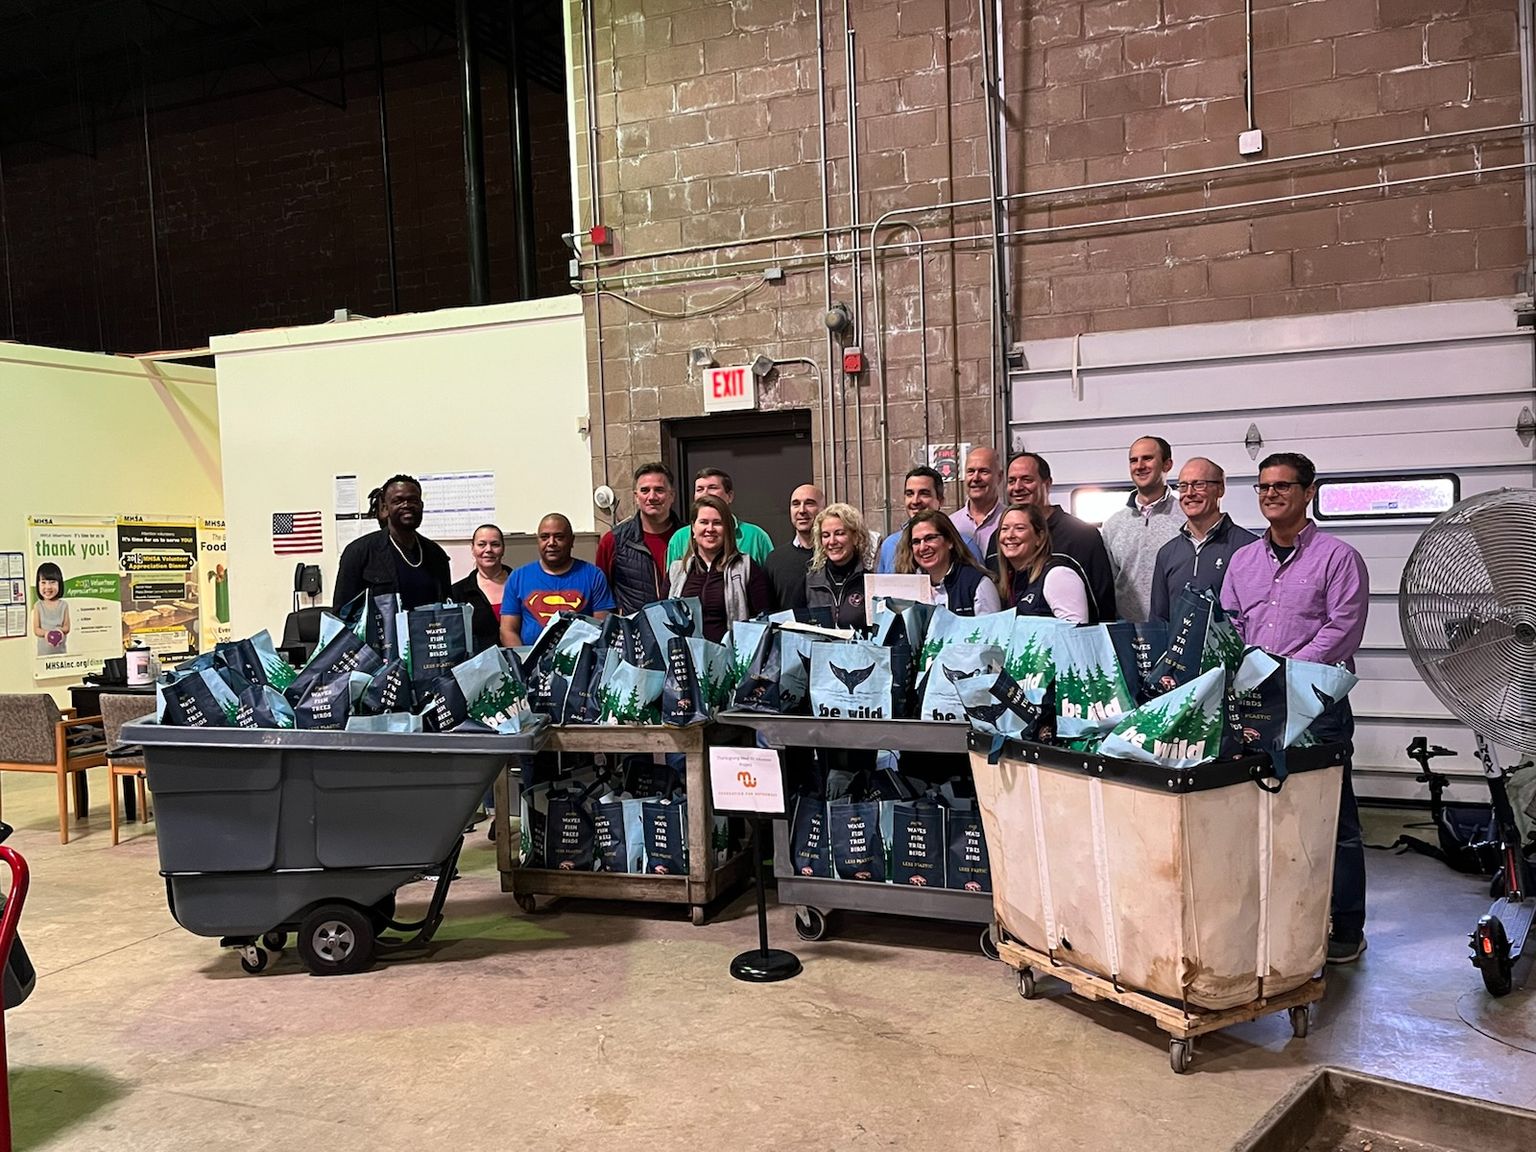 Group of people smiling for photo in a warehouse, posing with carts full of reusable bags.